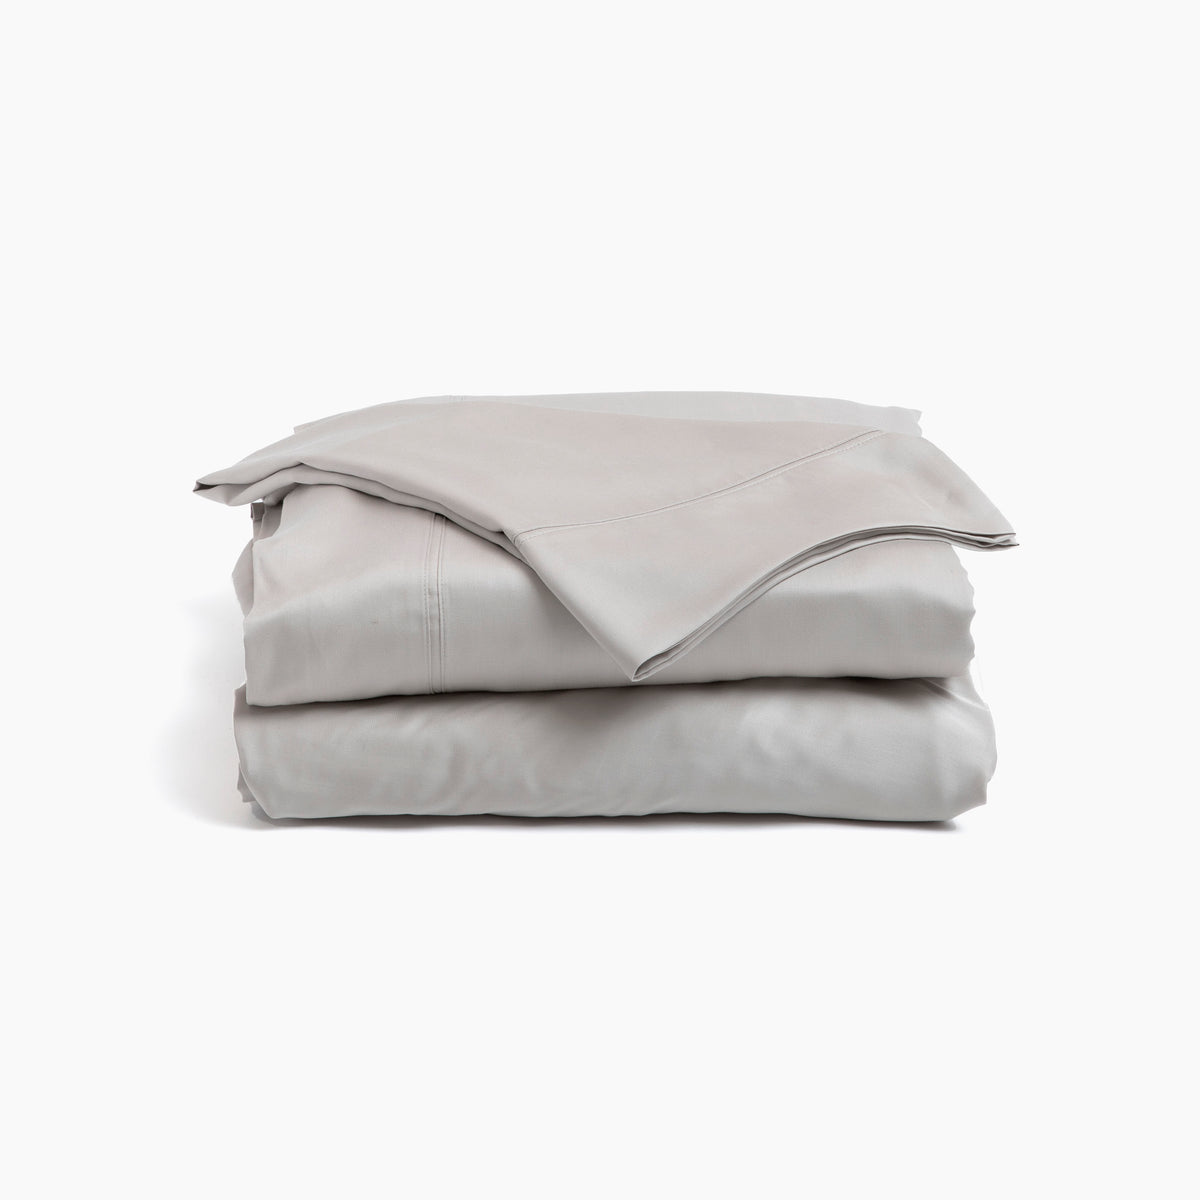 Image showcasing entire Dove Gray Recovery Viscose Sheet Set all neatly folded on top of one another with a white background. The image shows (from top to bottom): pillowcase, flat sheet, fitted sheet